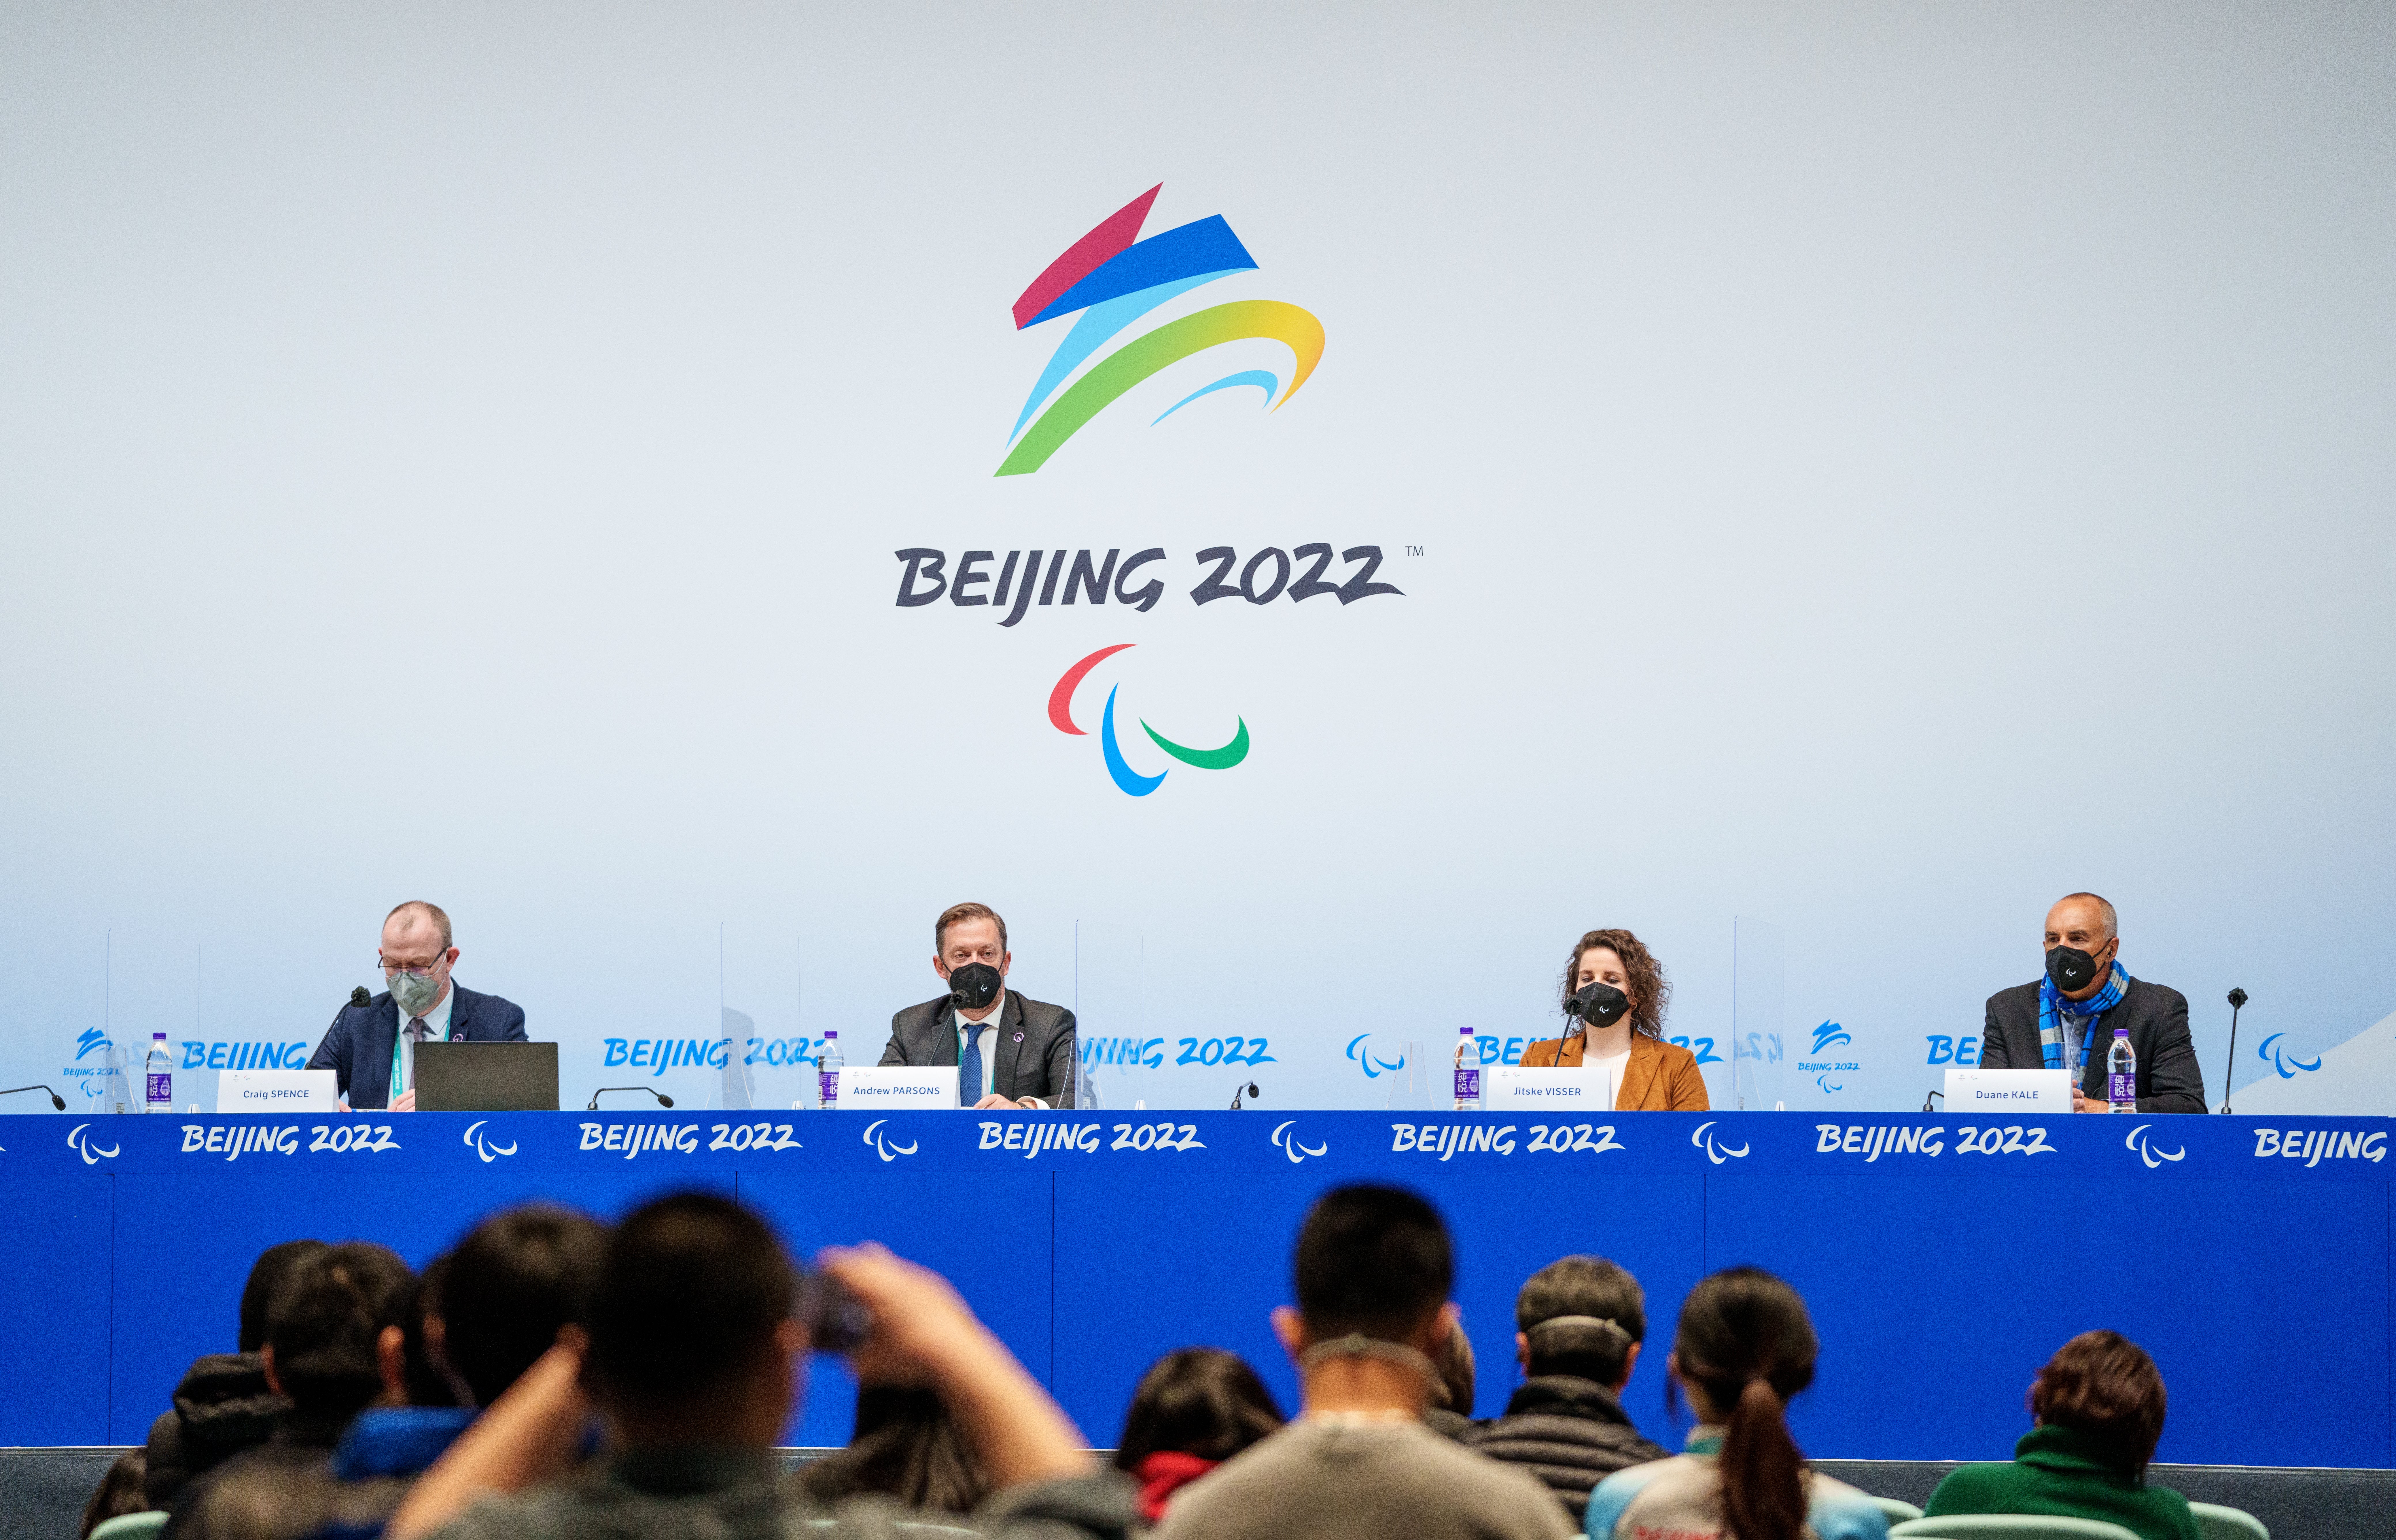 The IPC has allowed Russian and Belarusian athletes to compete at Beijing 2022